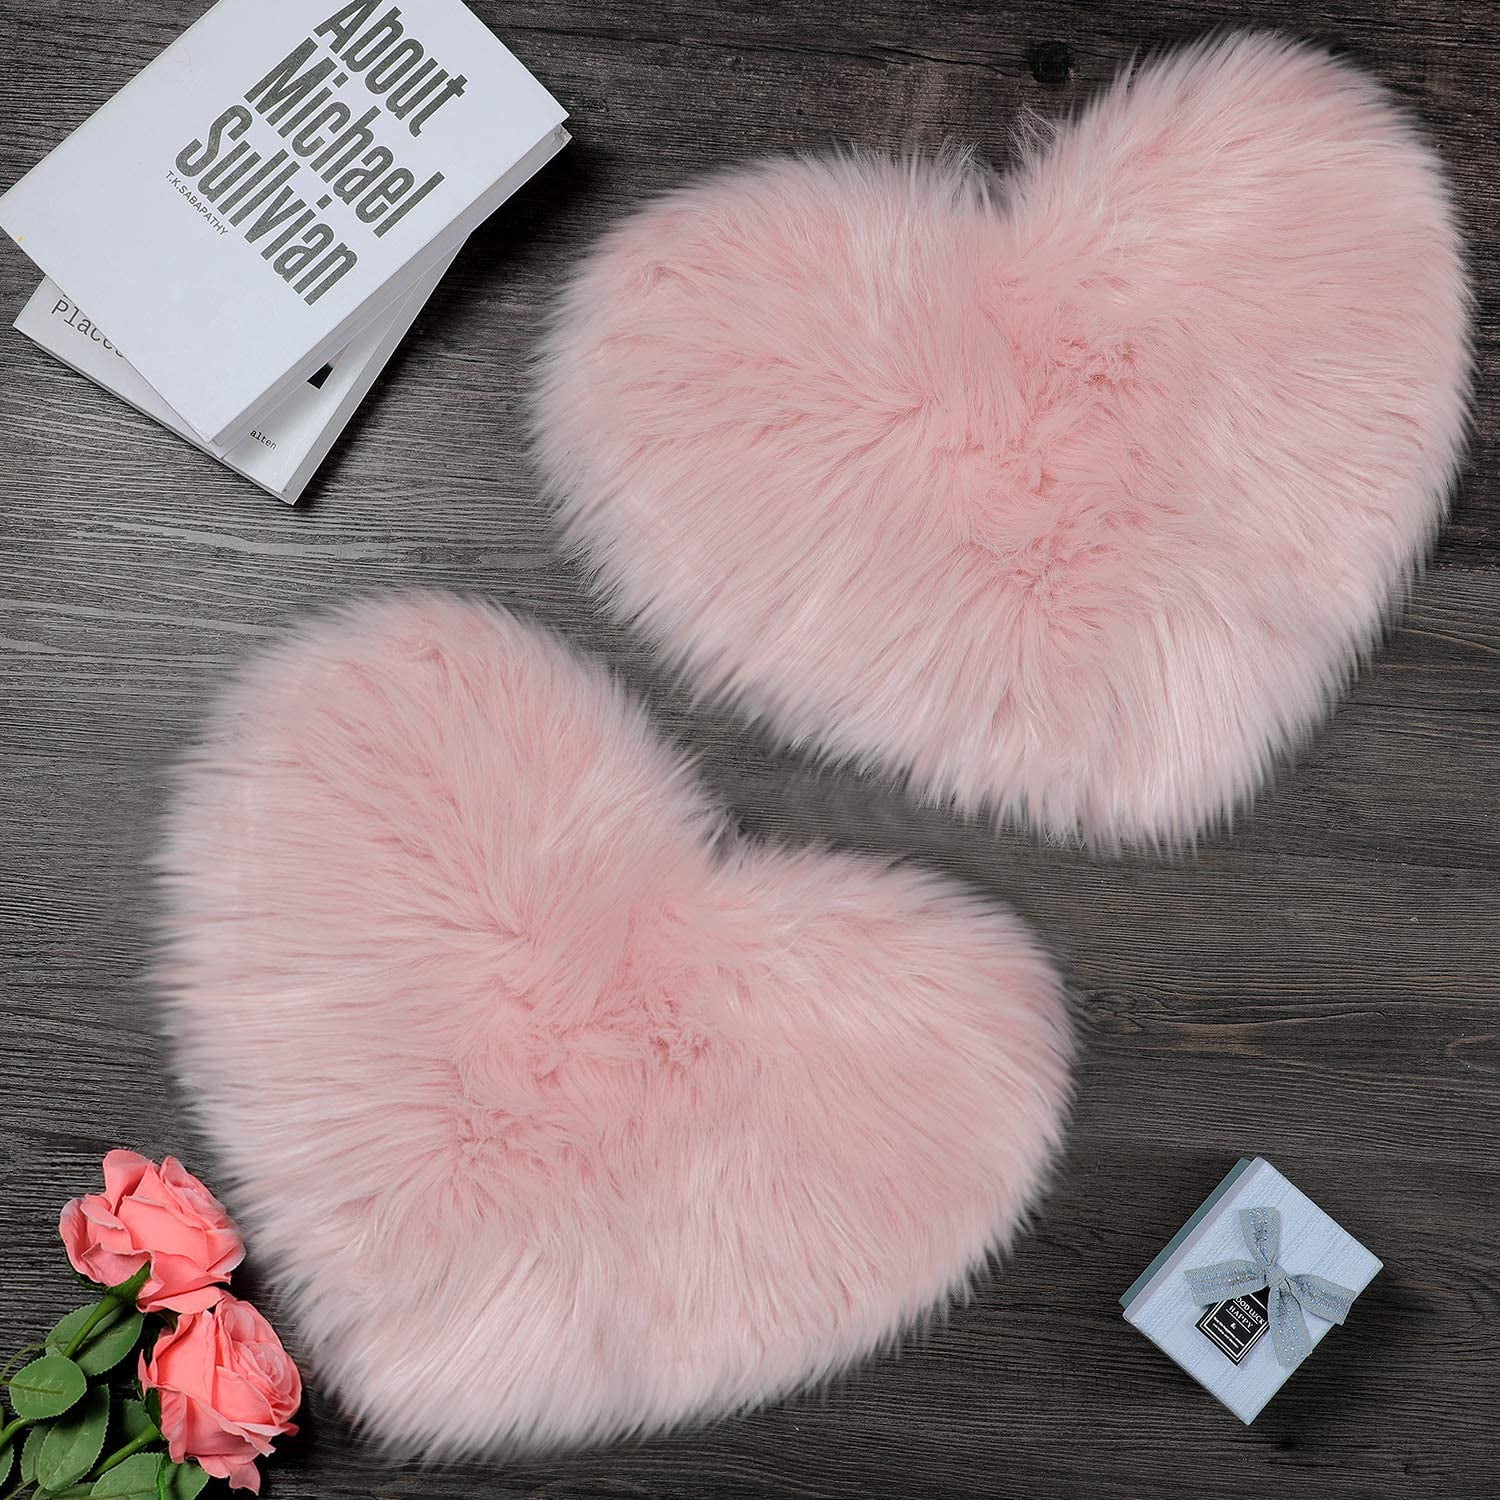 12 x 16 Inch 2 Pieces Fluffy Faux Sheepskin Area Rug Heart Shaped Rug Fluffy Room Carpet for Home Living Room Sofa Floor Bedroom Purple, Blue, Pink